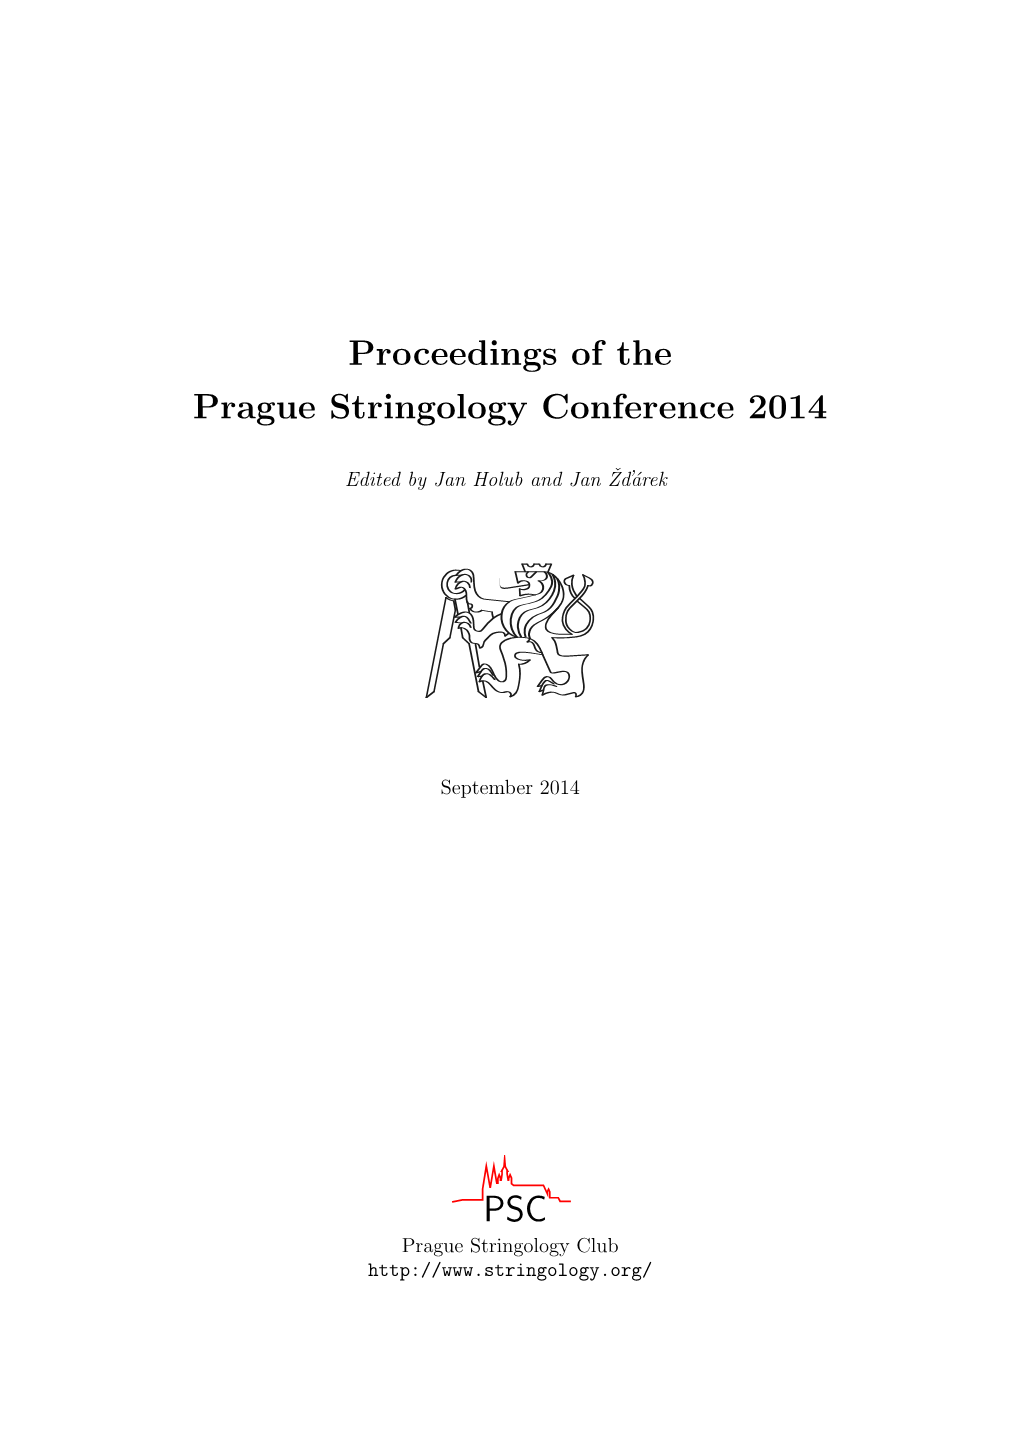 Proceedings of the Prague Stringology Conference 2014